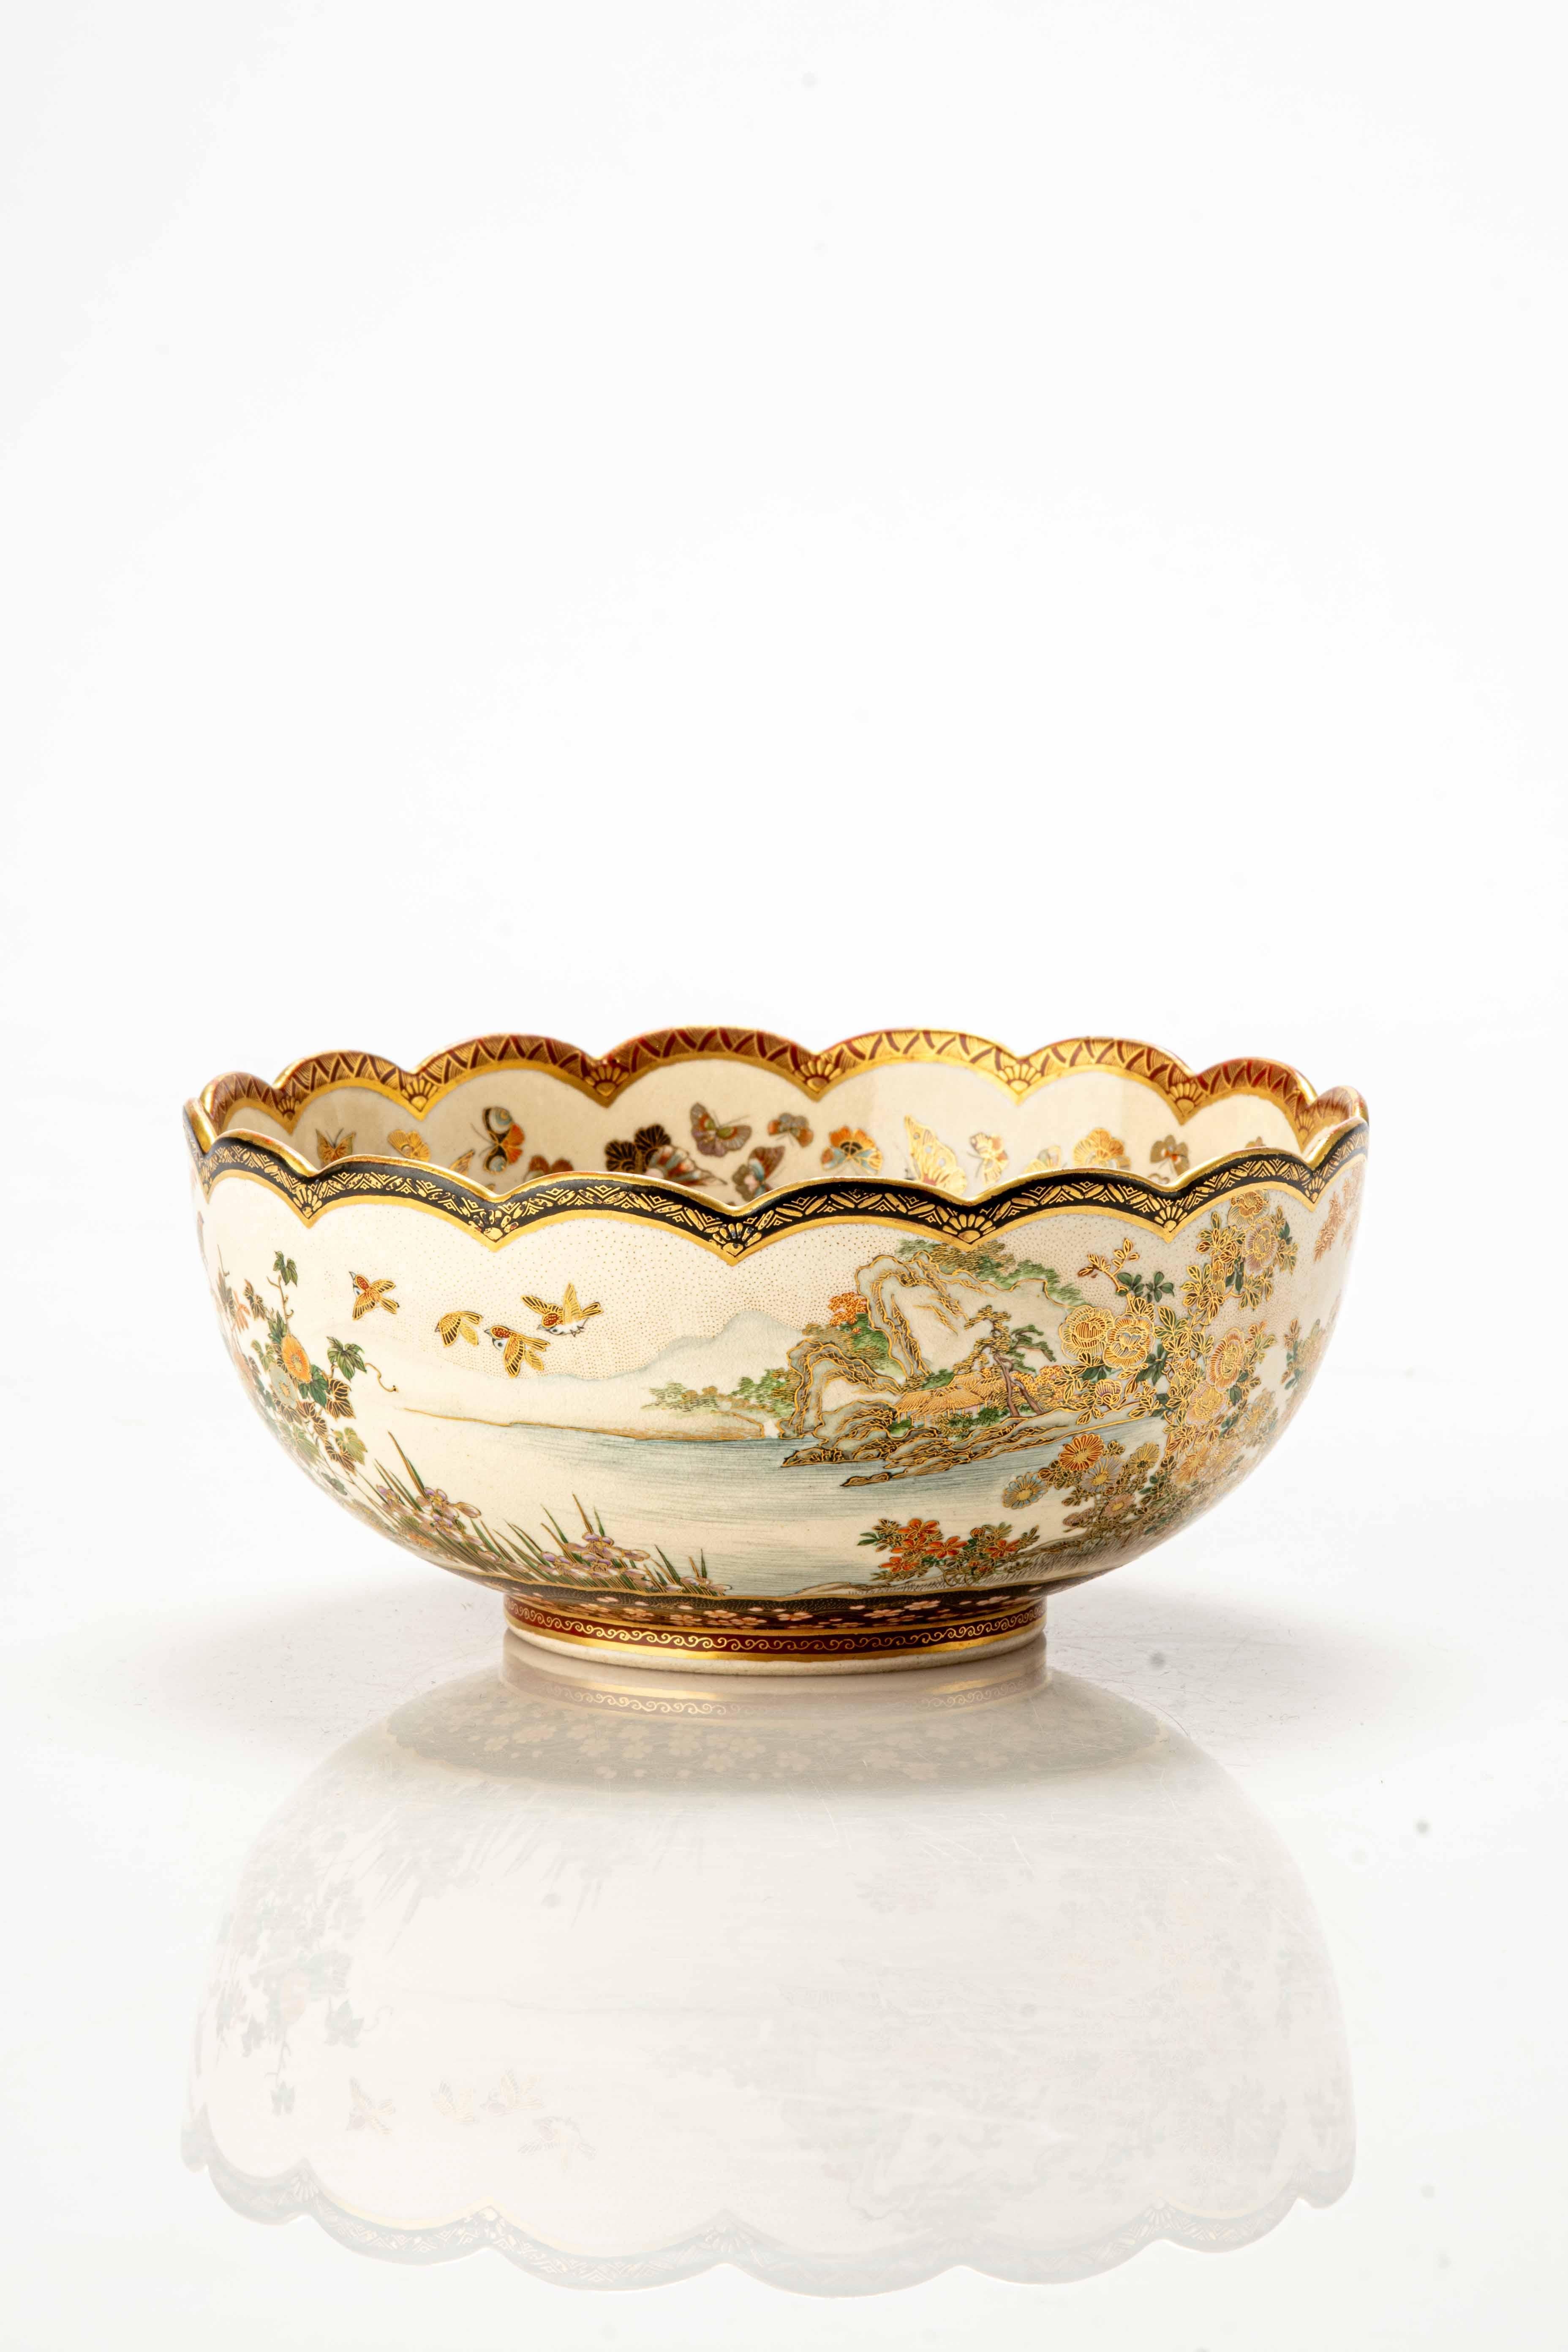 Satsuma ceramic lobed bowl adorned with raised enamels and fine gold details, depicting a vibrant landscape within. Characters and traditional Japanese homes emerge from the landscape while in the background, mountains and snow-capped Mount Fuji add